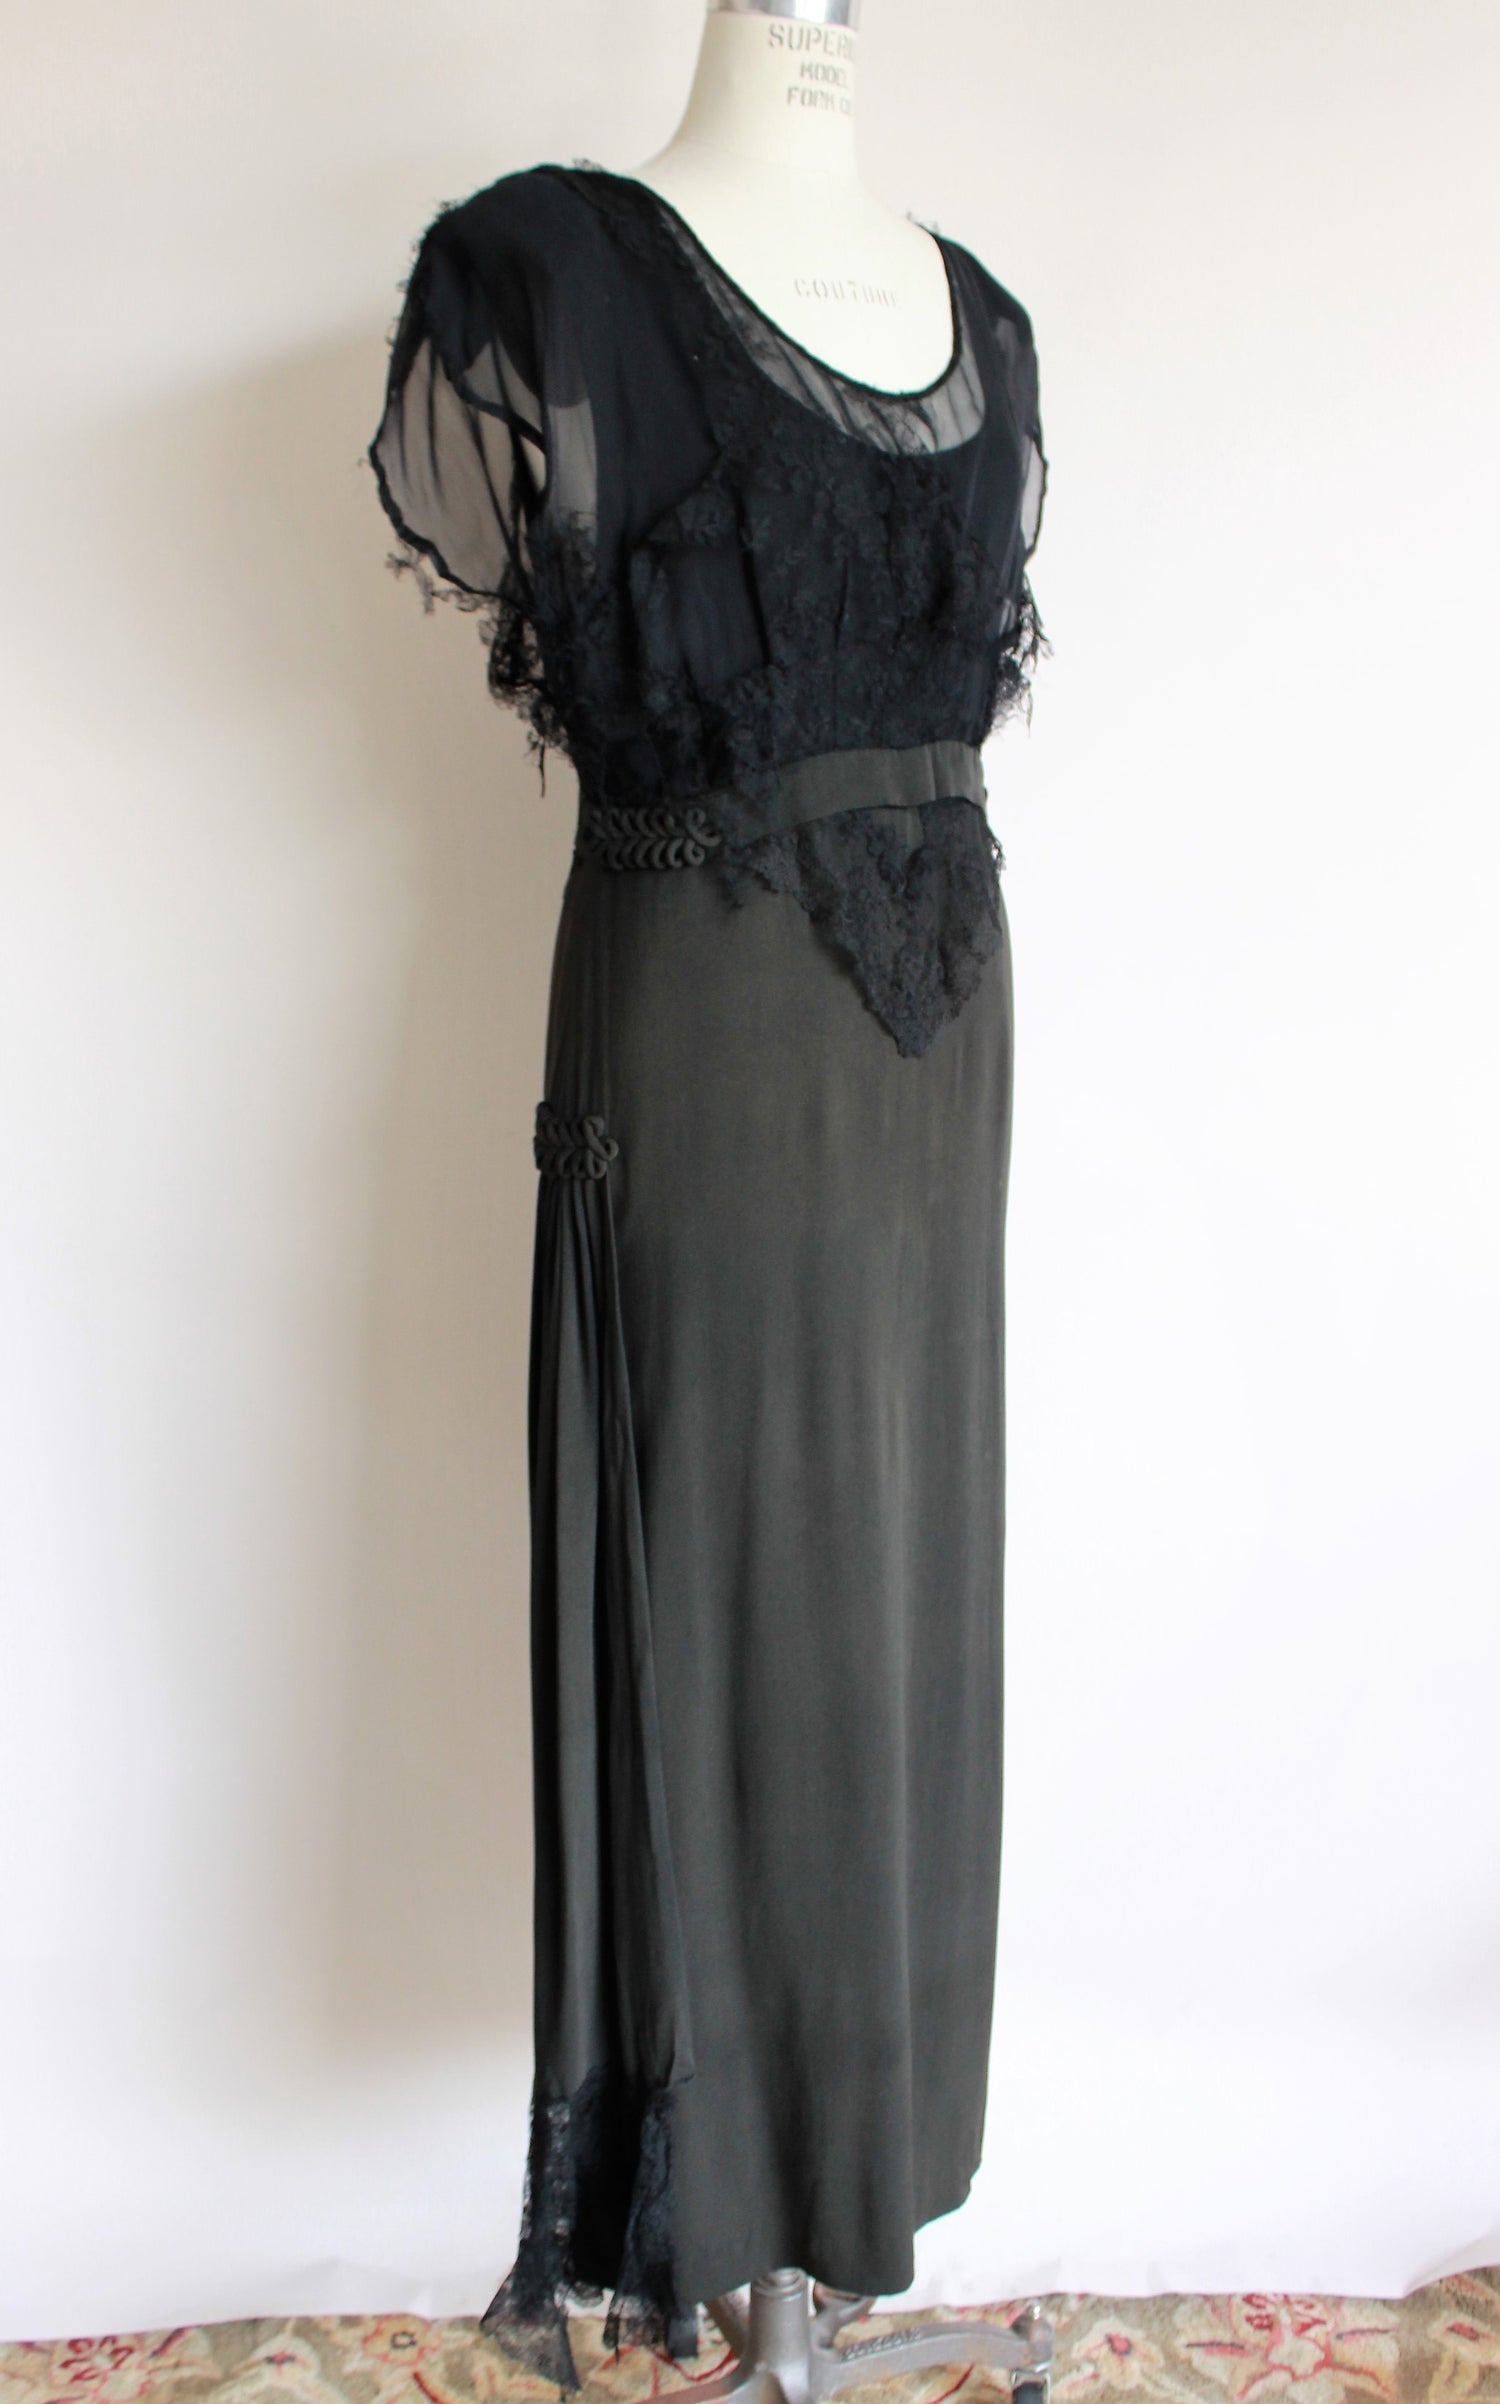 Vintage 1940s Black Rayon Dress With Lace Blouse